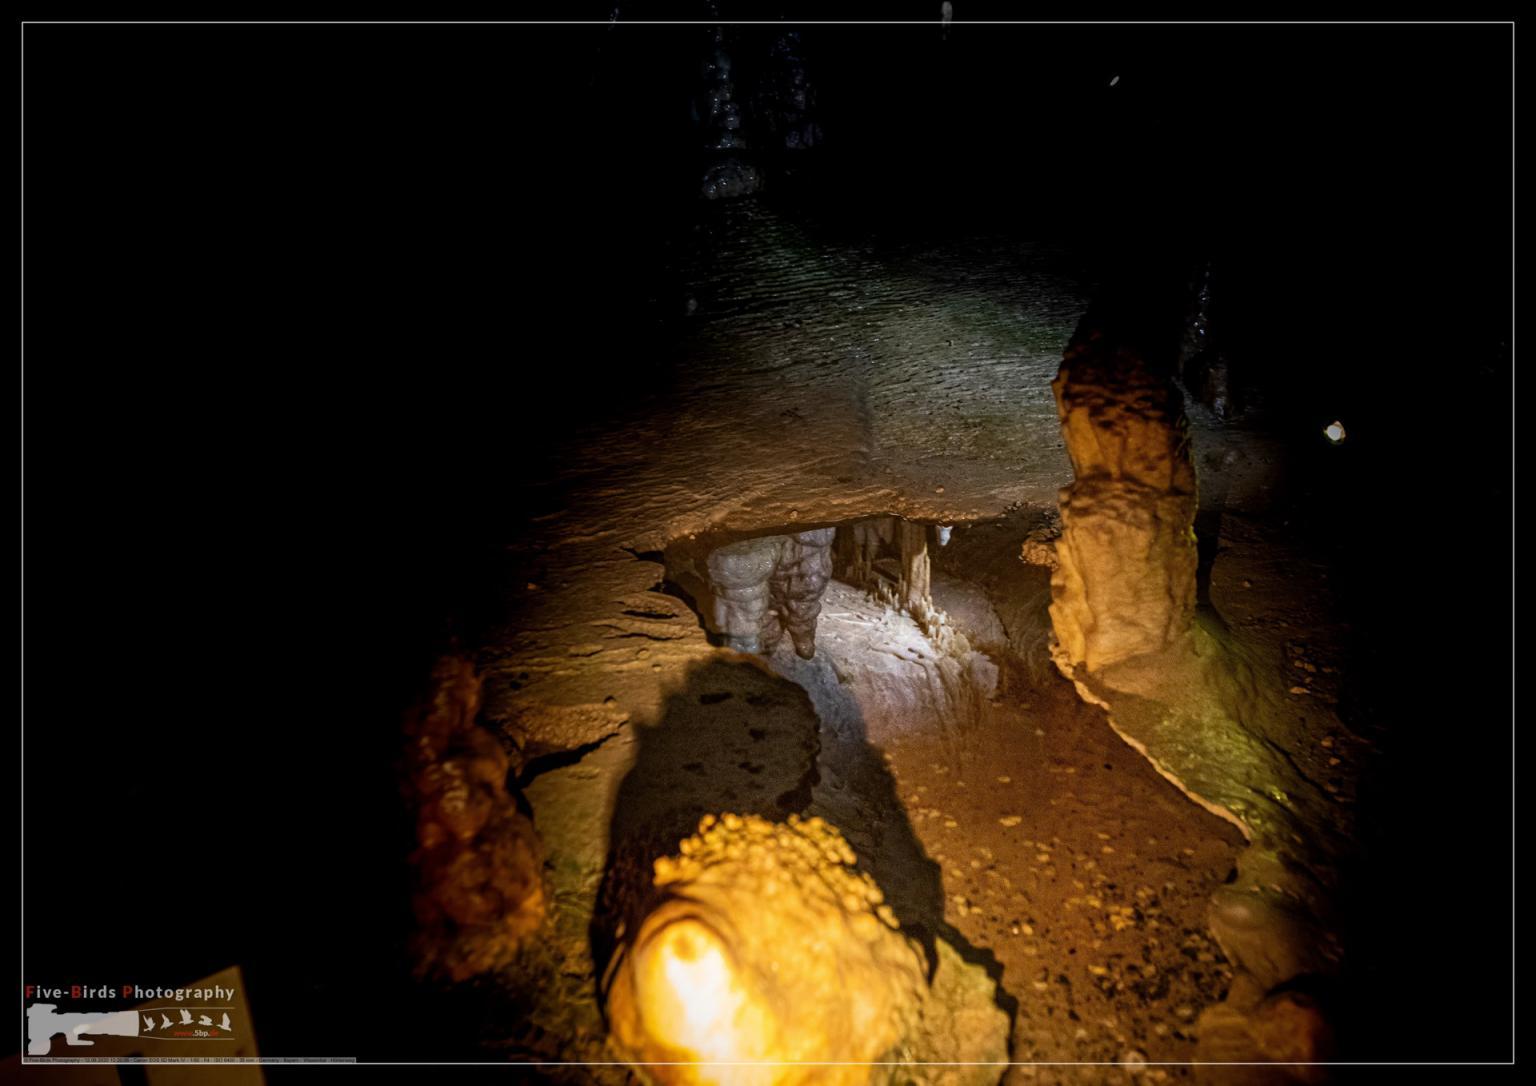 Interior photos of a stalactite cave in Franconian Switzerland in southern Germany